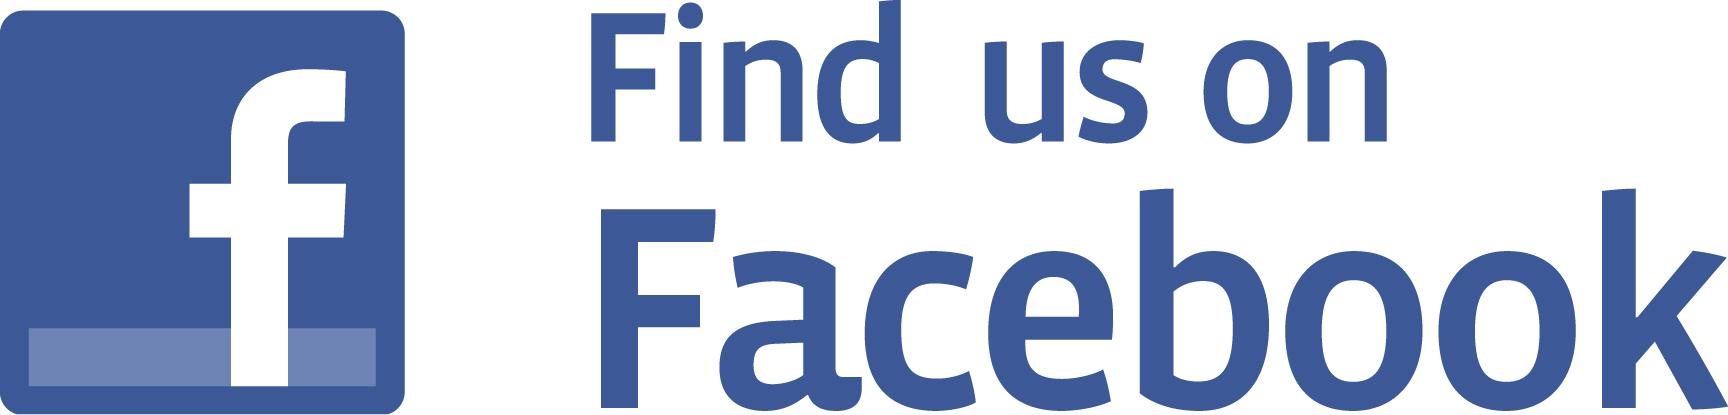 Join Us On Facebook Logo - Stay Connected | Alumni Relations